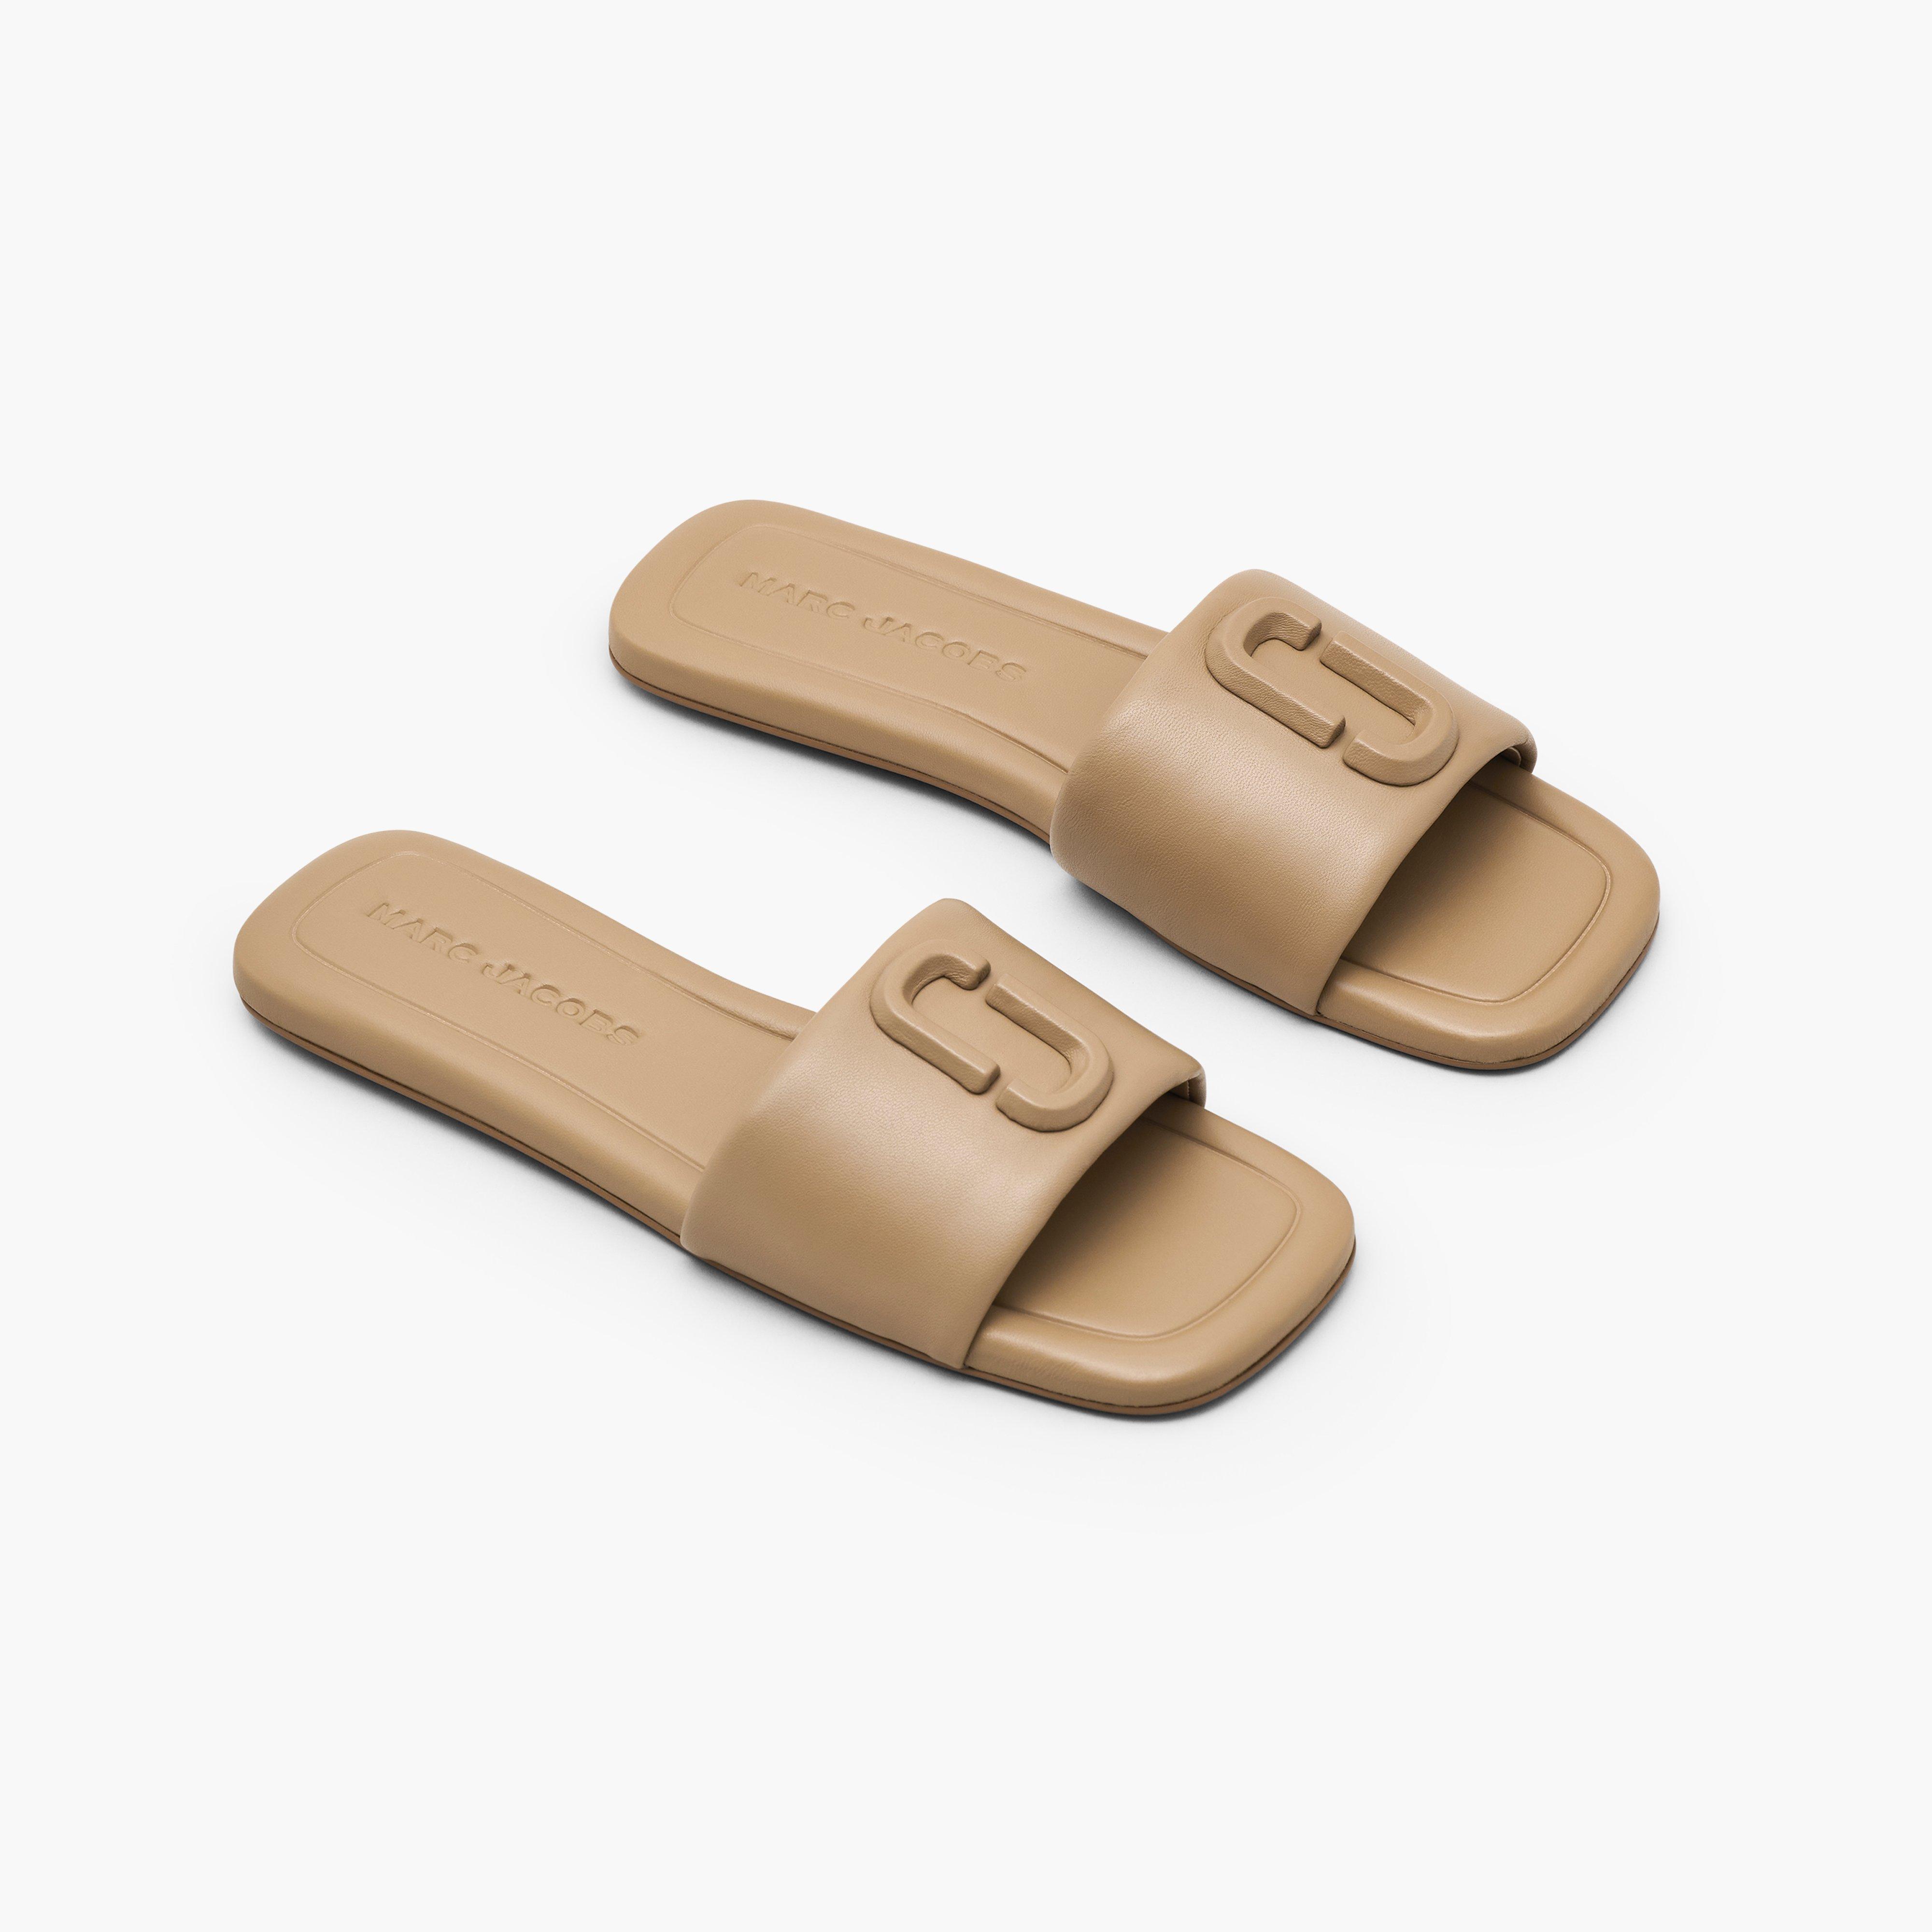 Marc by Marc jacobs The J Marc Leather Sandal,CAMEL